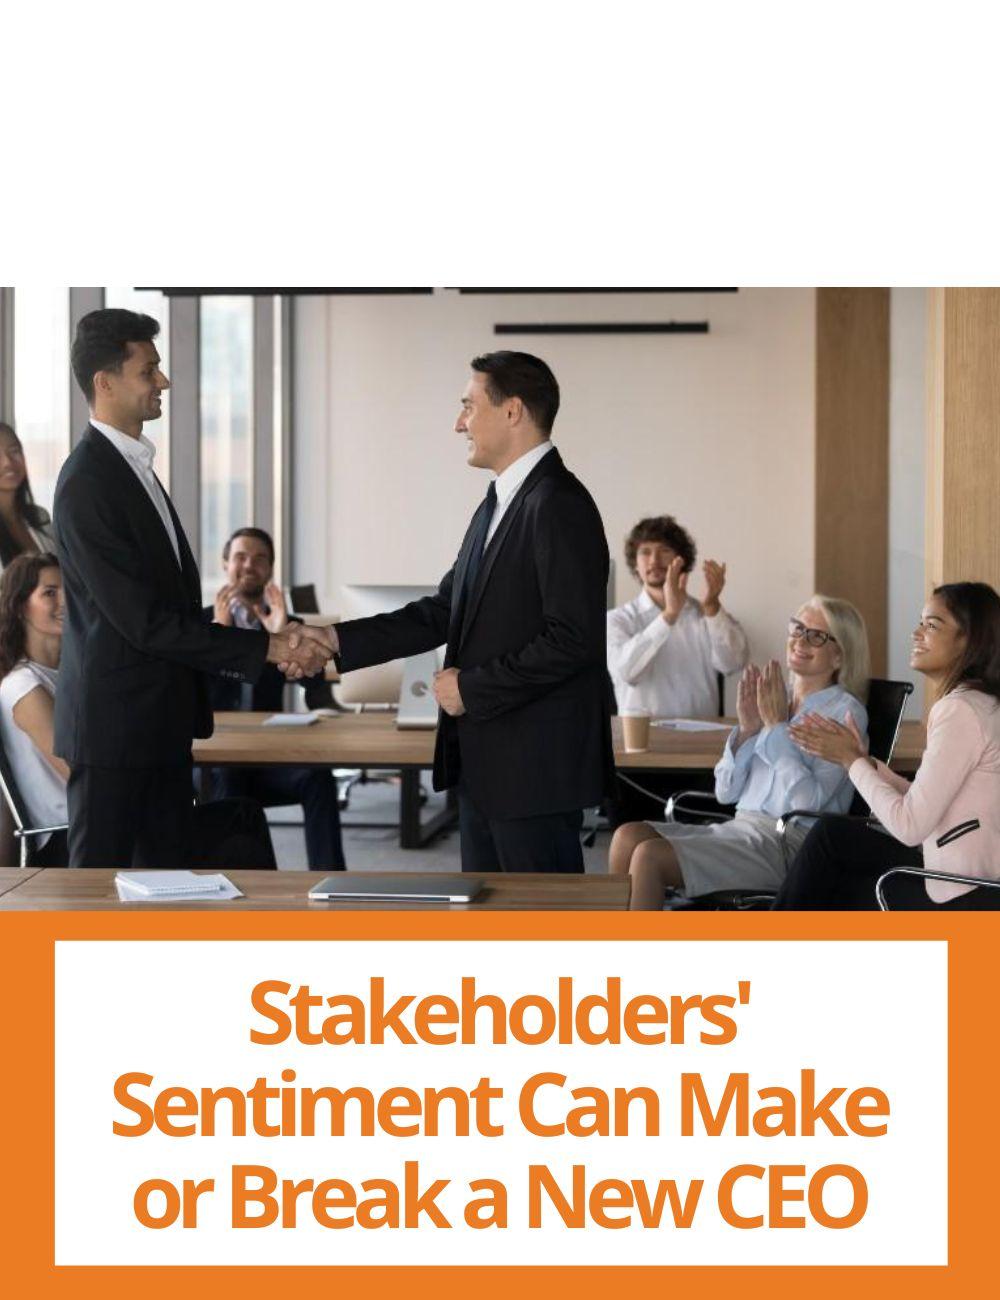 Link to related stories. Image: two people shaking hands and other people applauding. Story headline: Stakeholders' Sentiment Can Make or Break a New CEO